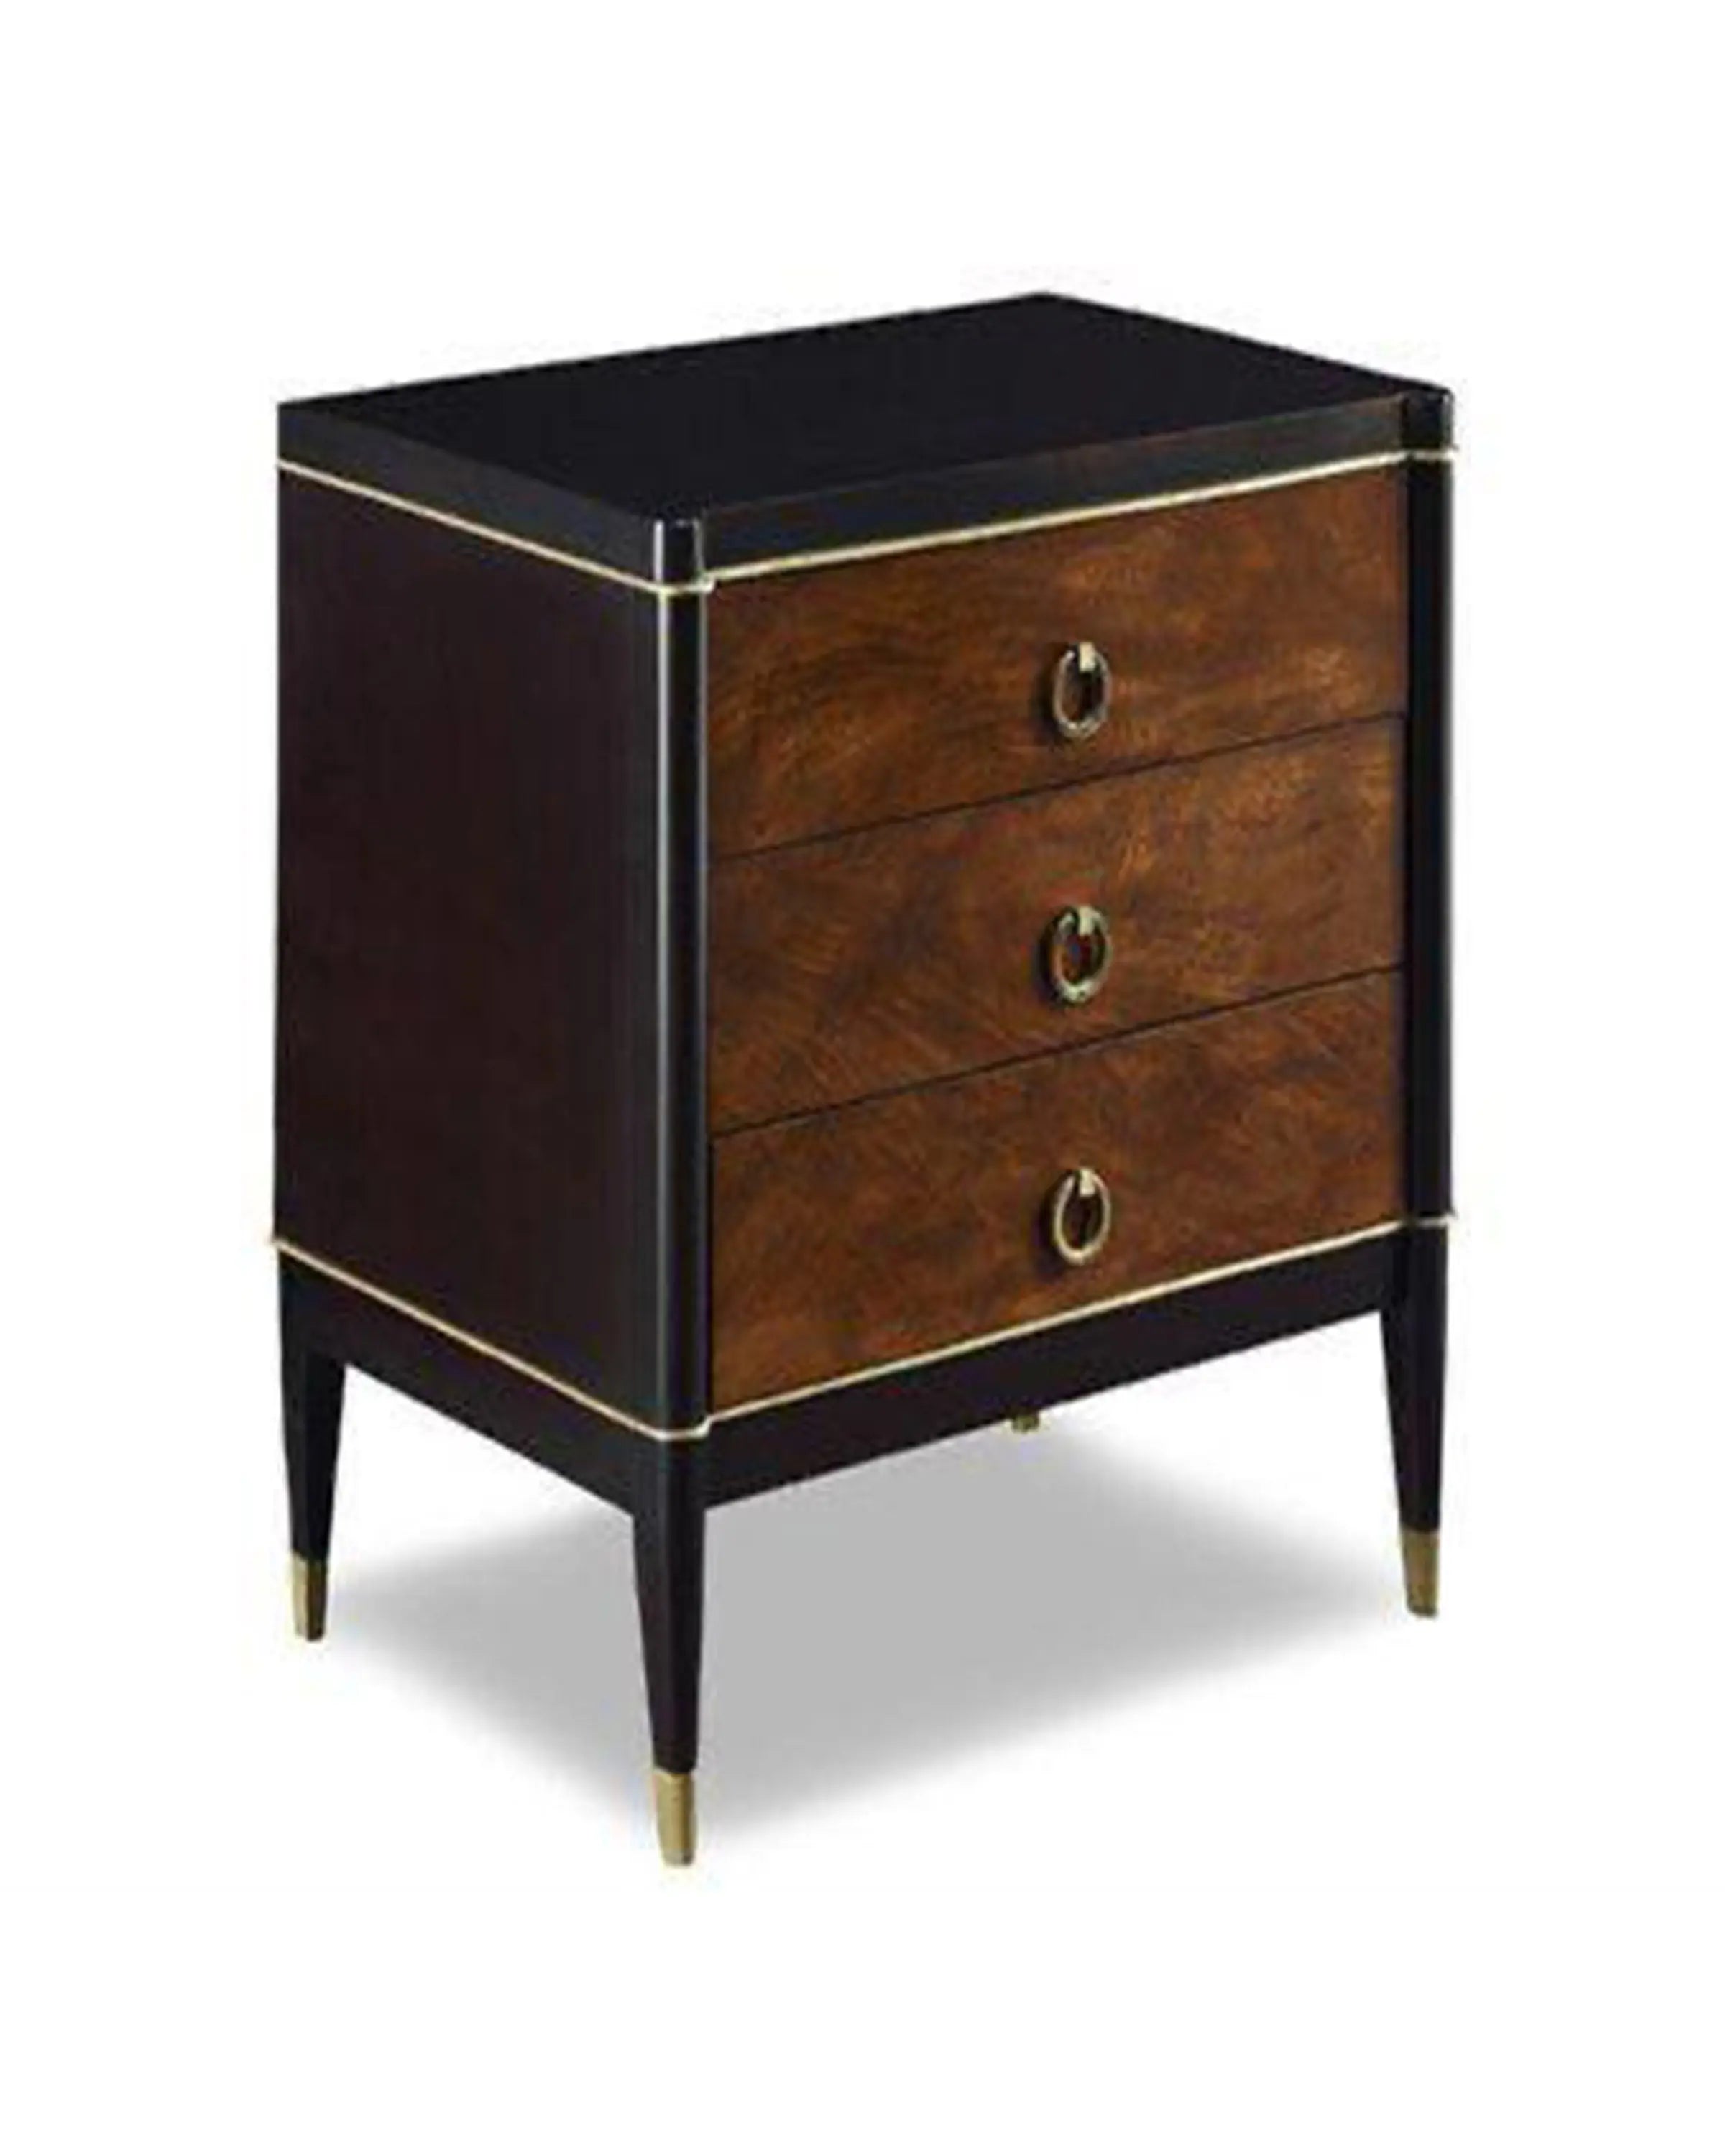 TEO BROWN SIDE TABLE ANGIE HOMES